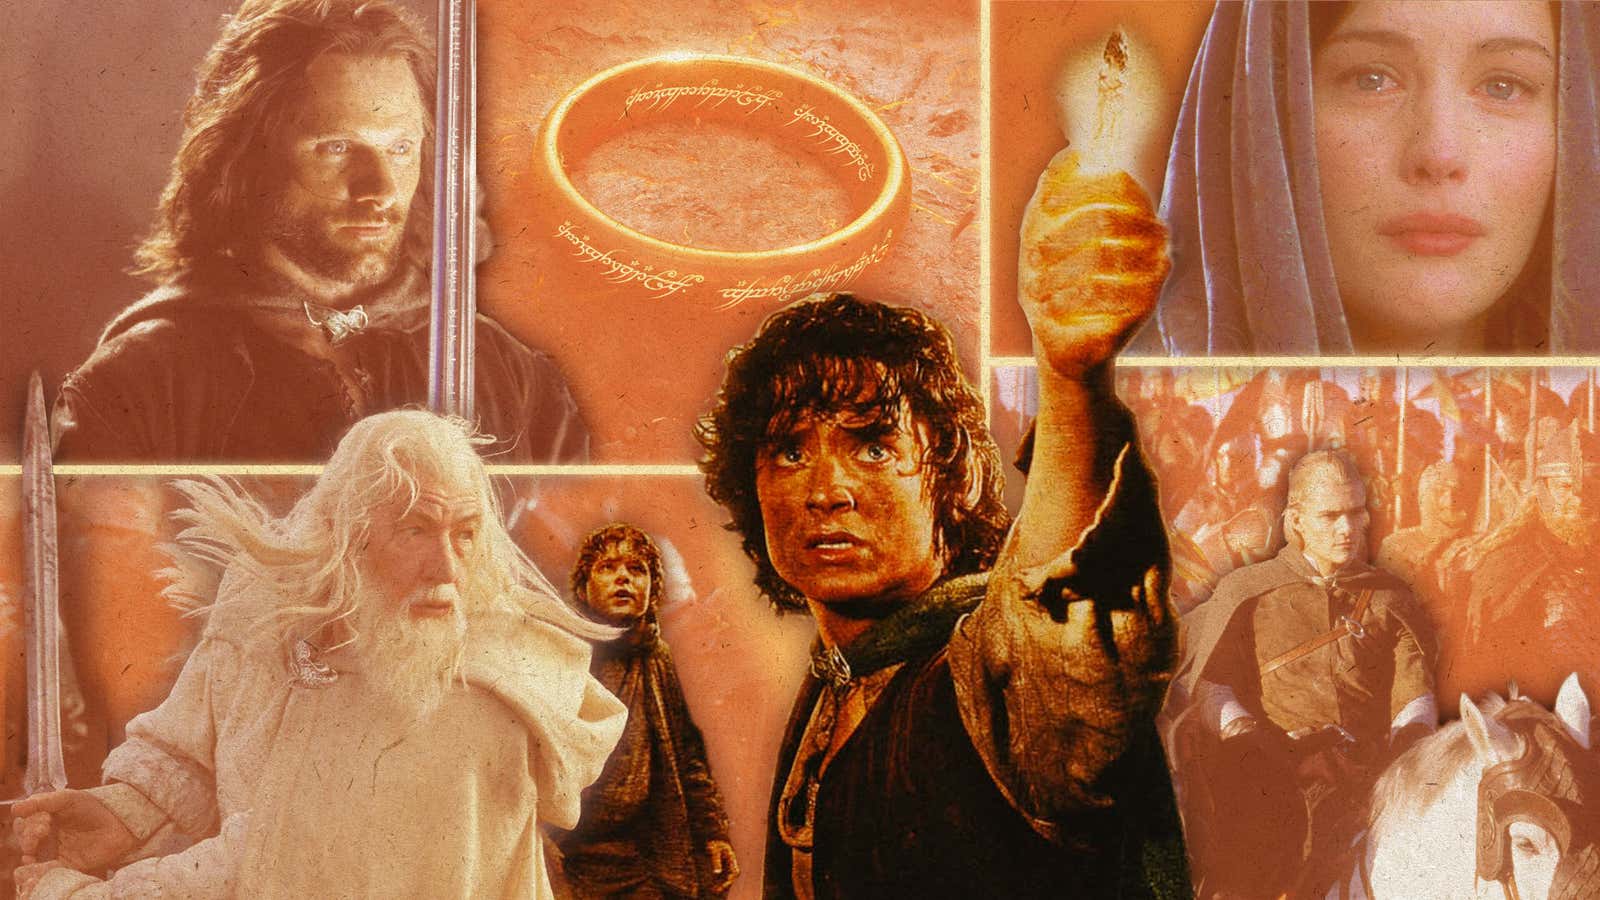 The Lord of the Rings Turns 20: Looking Back on an Epic Cinematic